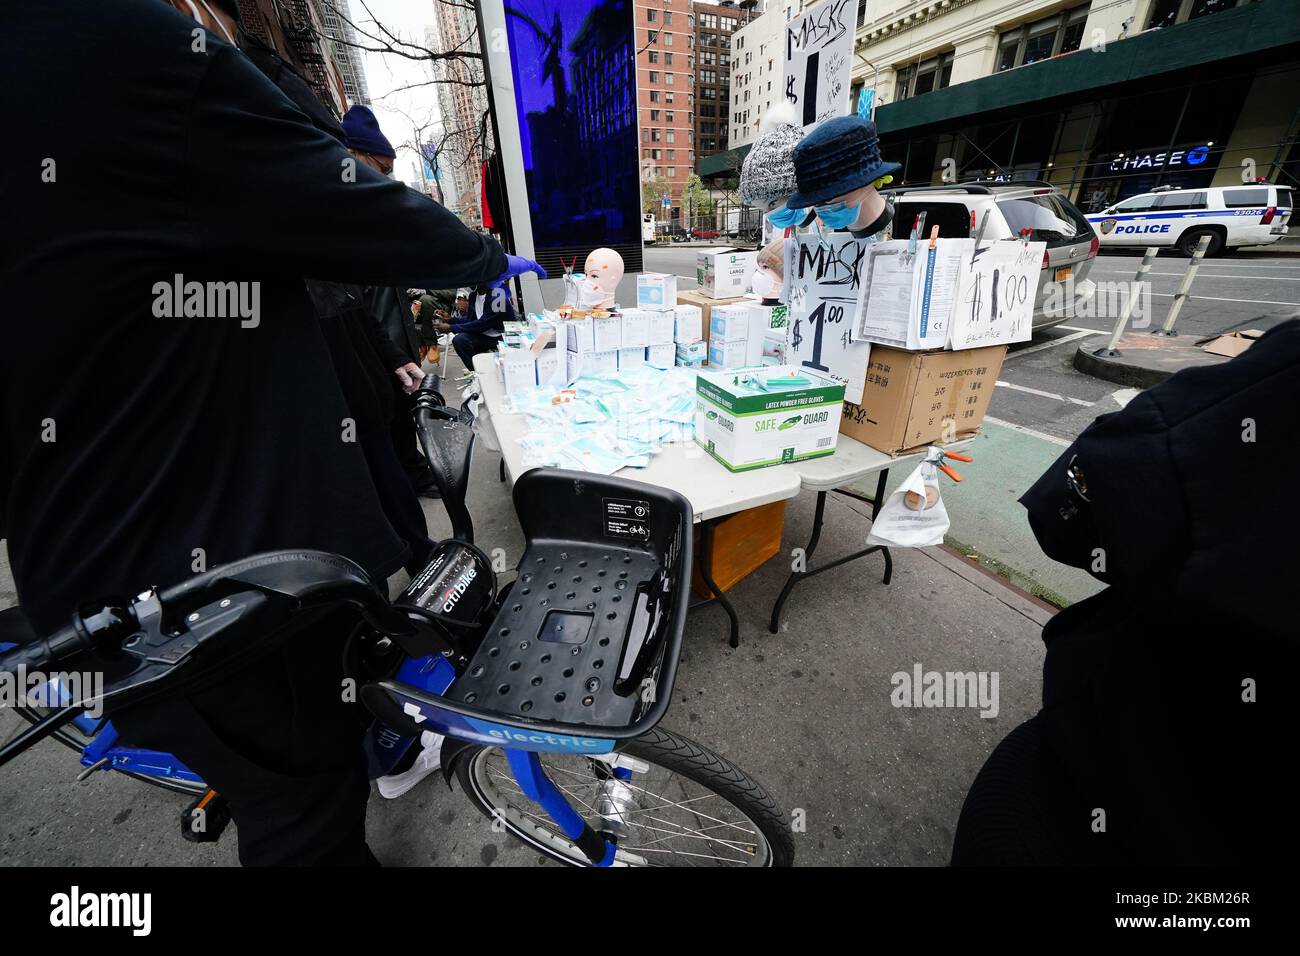 A person on Citibike is seen purchasing surgical masks and gloves to combat Coronavirus Pandemic on April 5, 2020. (Photo by John Nacion/NurPhoto) Stock Photo